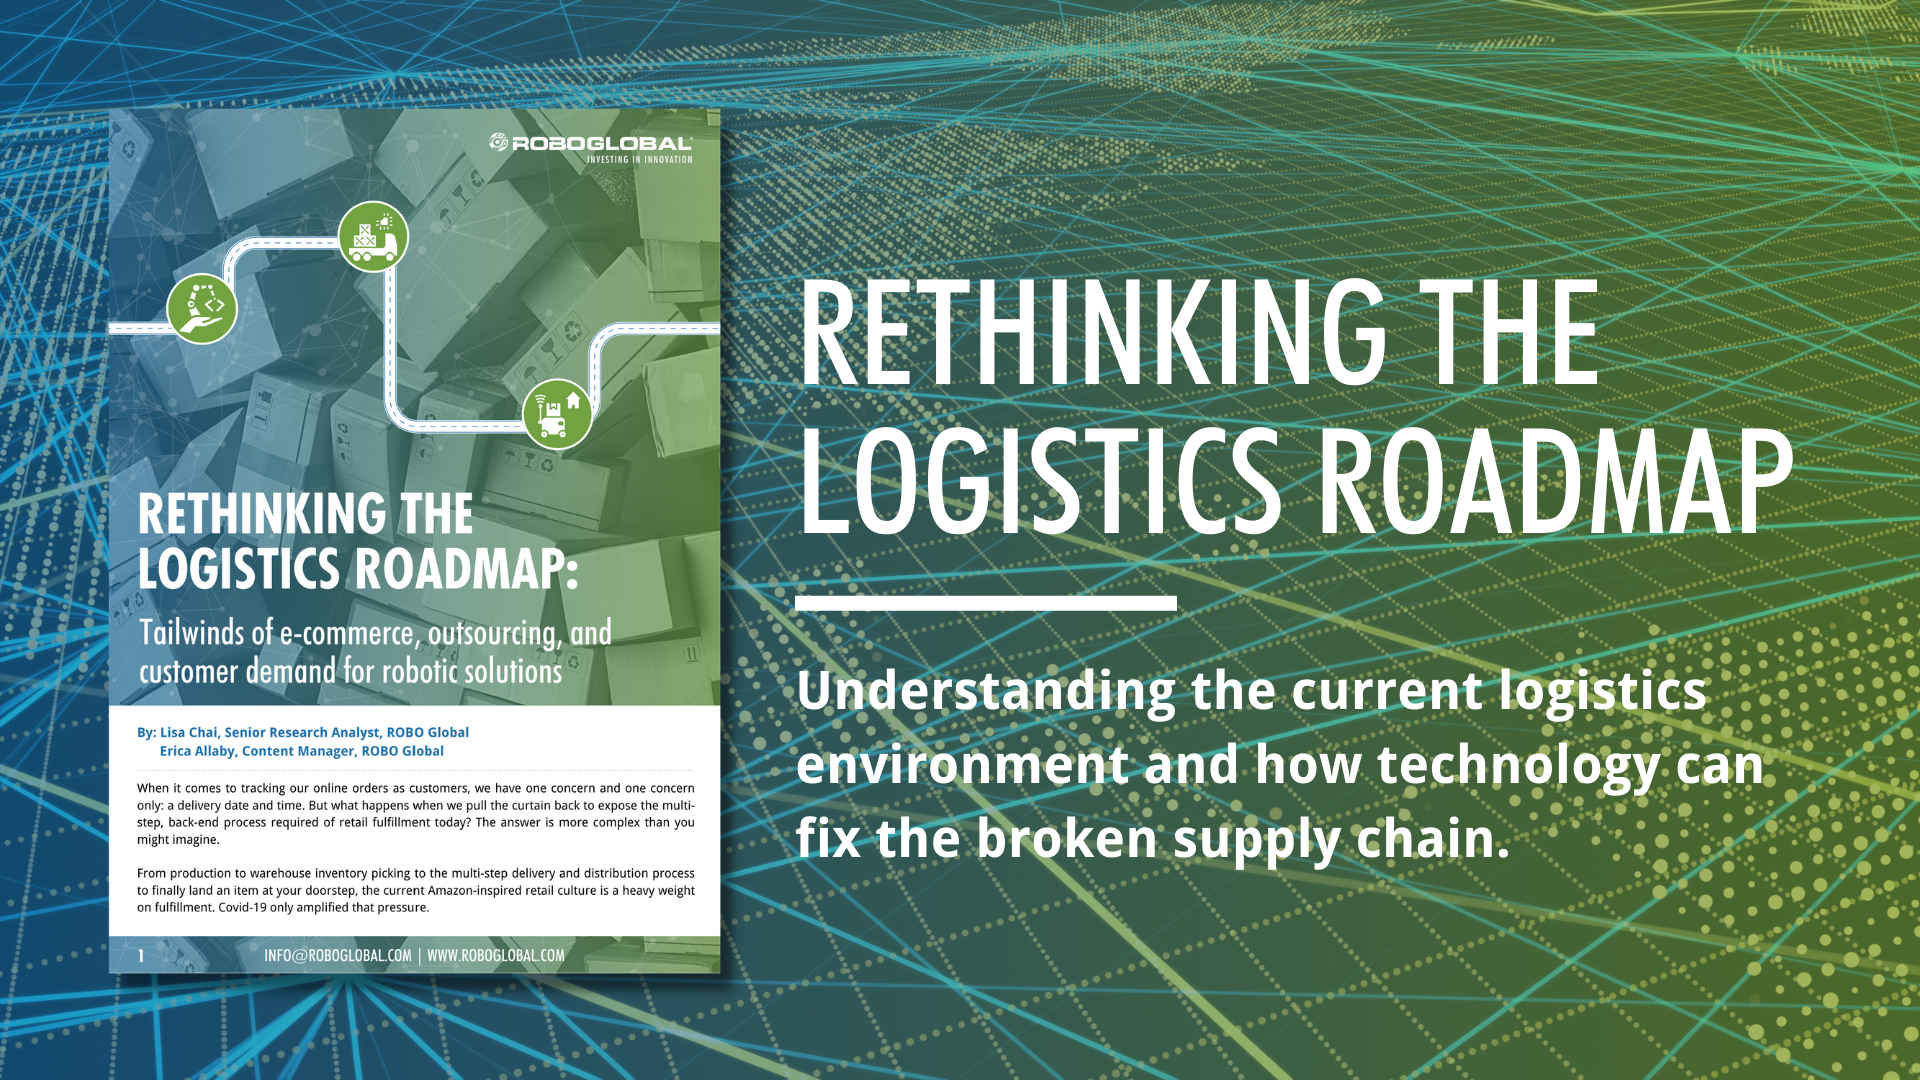 Rethinking the Logistics Roadmap: Using Tech to Transform the Supply Chain